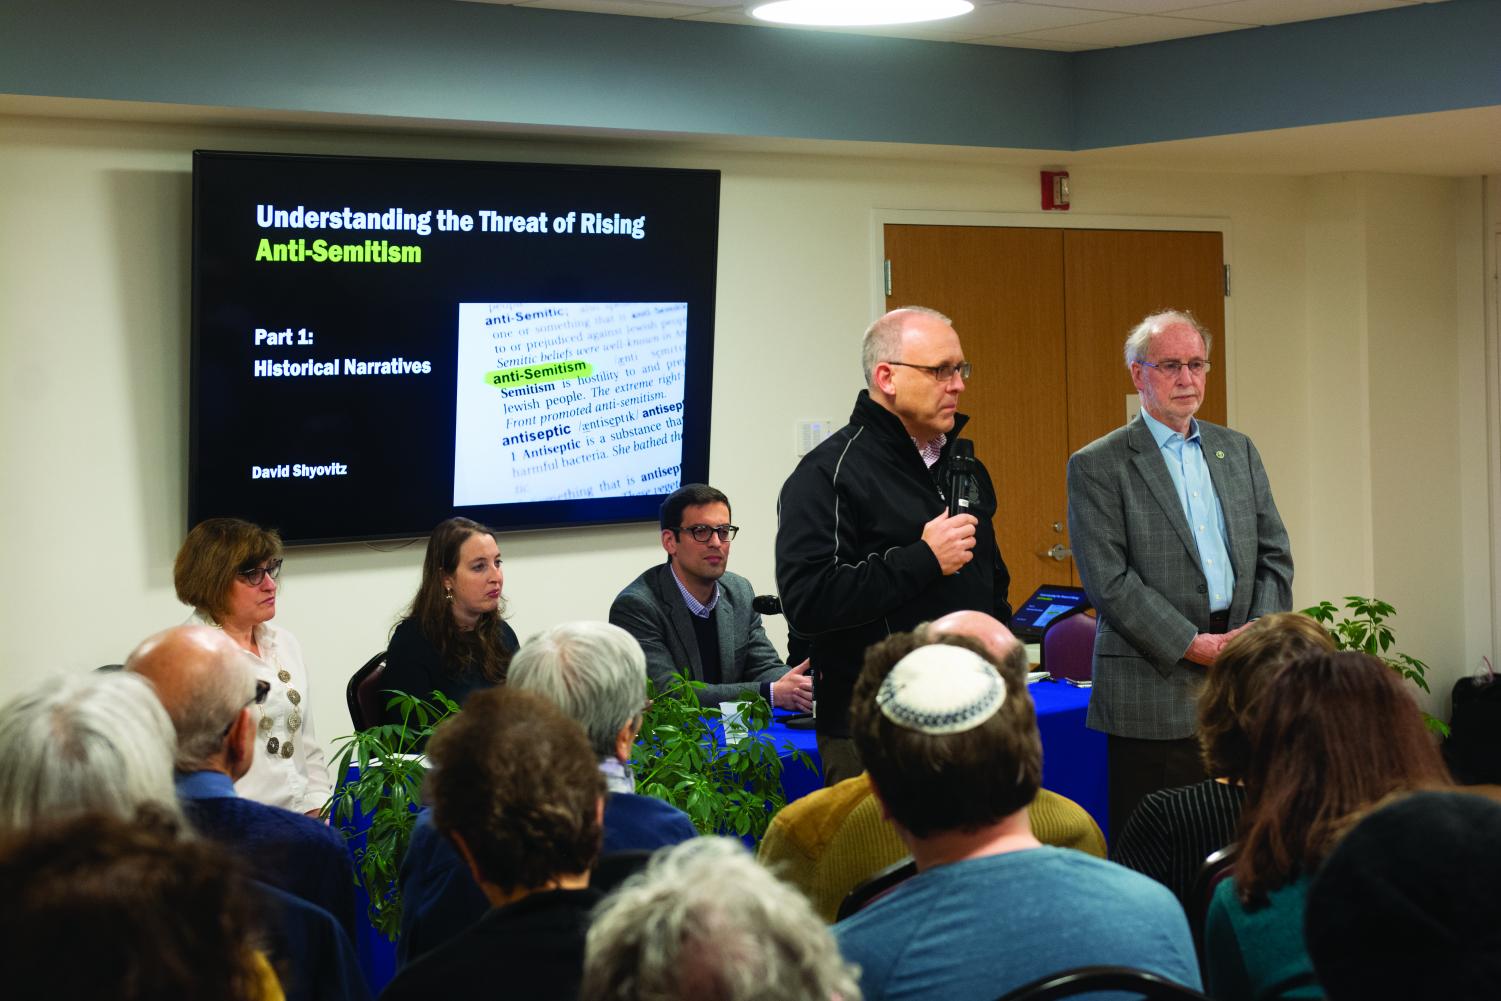 Evanston+Mayor+Steve+Hagerty+speaks+to+community+members+about+the+rise+of+antisemitism+on+Tuesday.+The+event%2C+hosted+at+Beth+Emet+synagogue%2C+featured+a+panel.